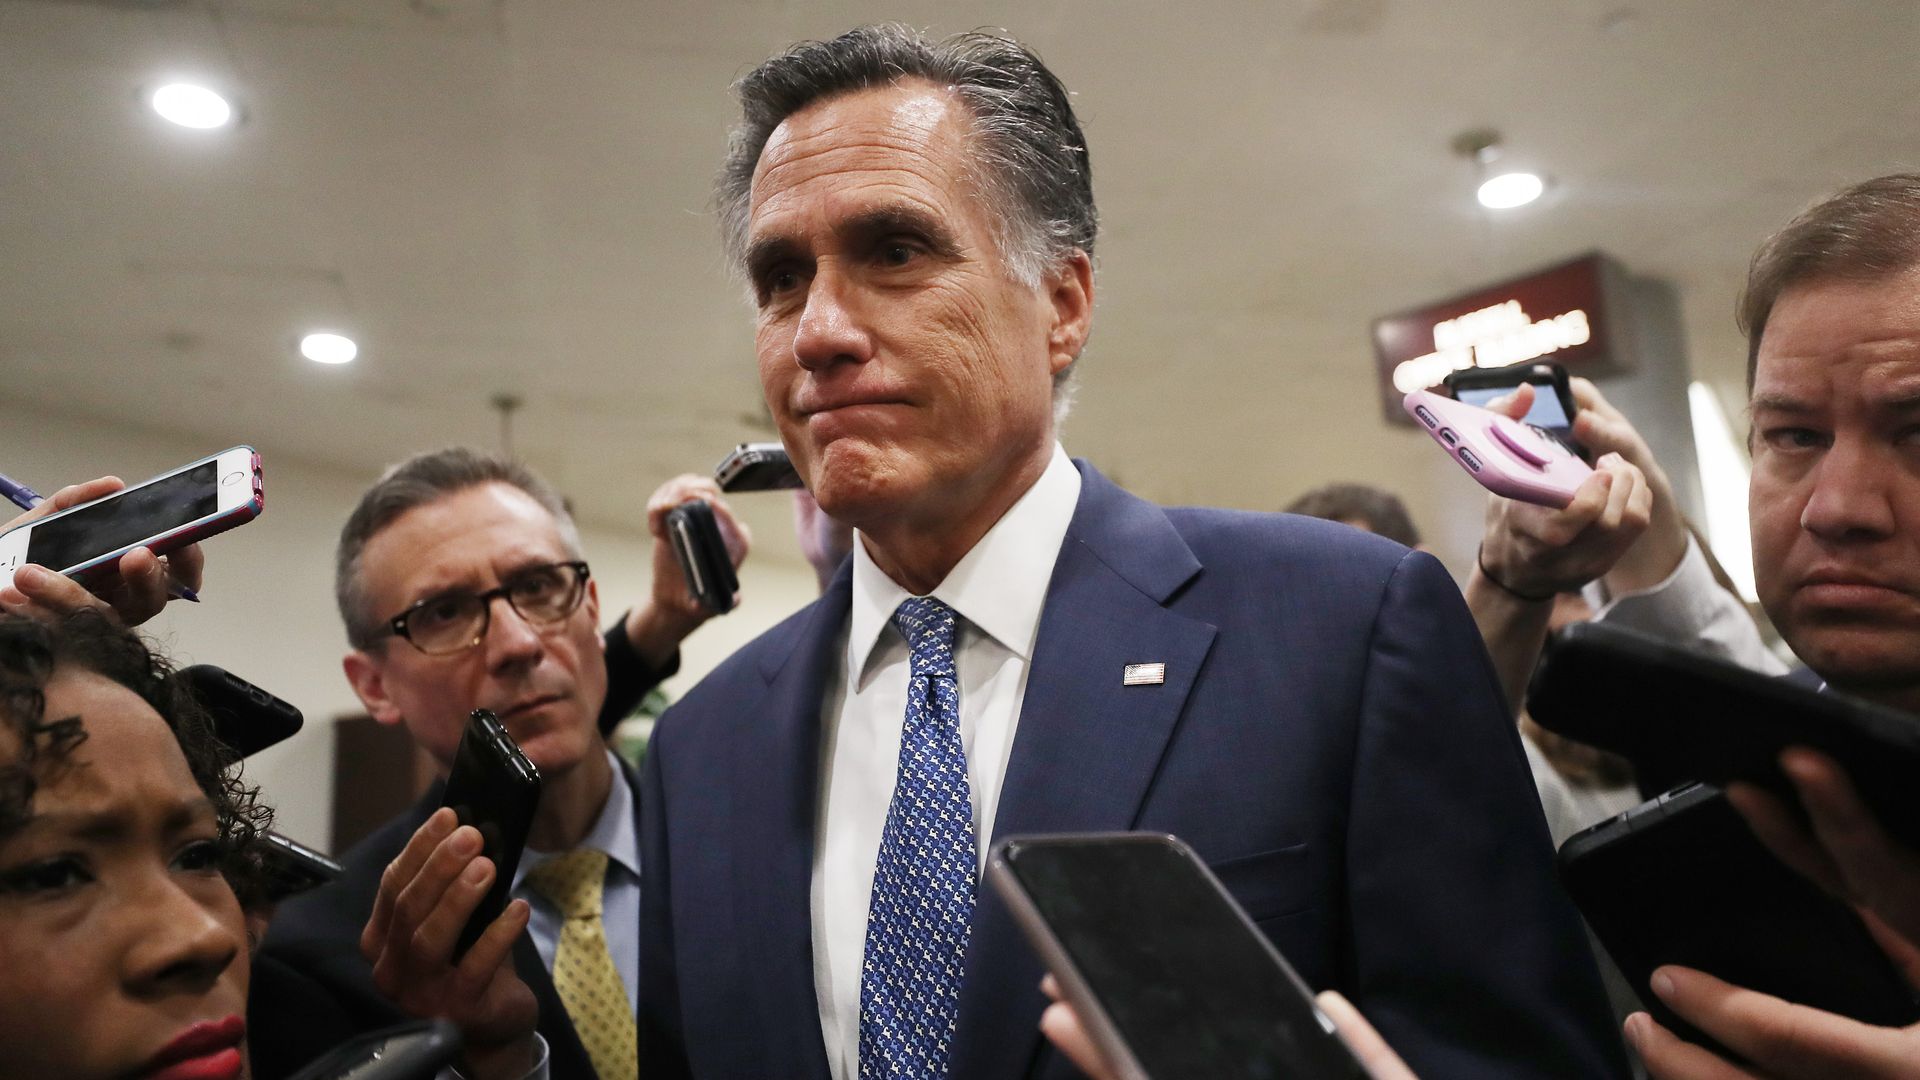 Mitt Romney shunned from conservative conference after impeachment vote - Axios